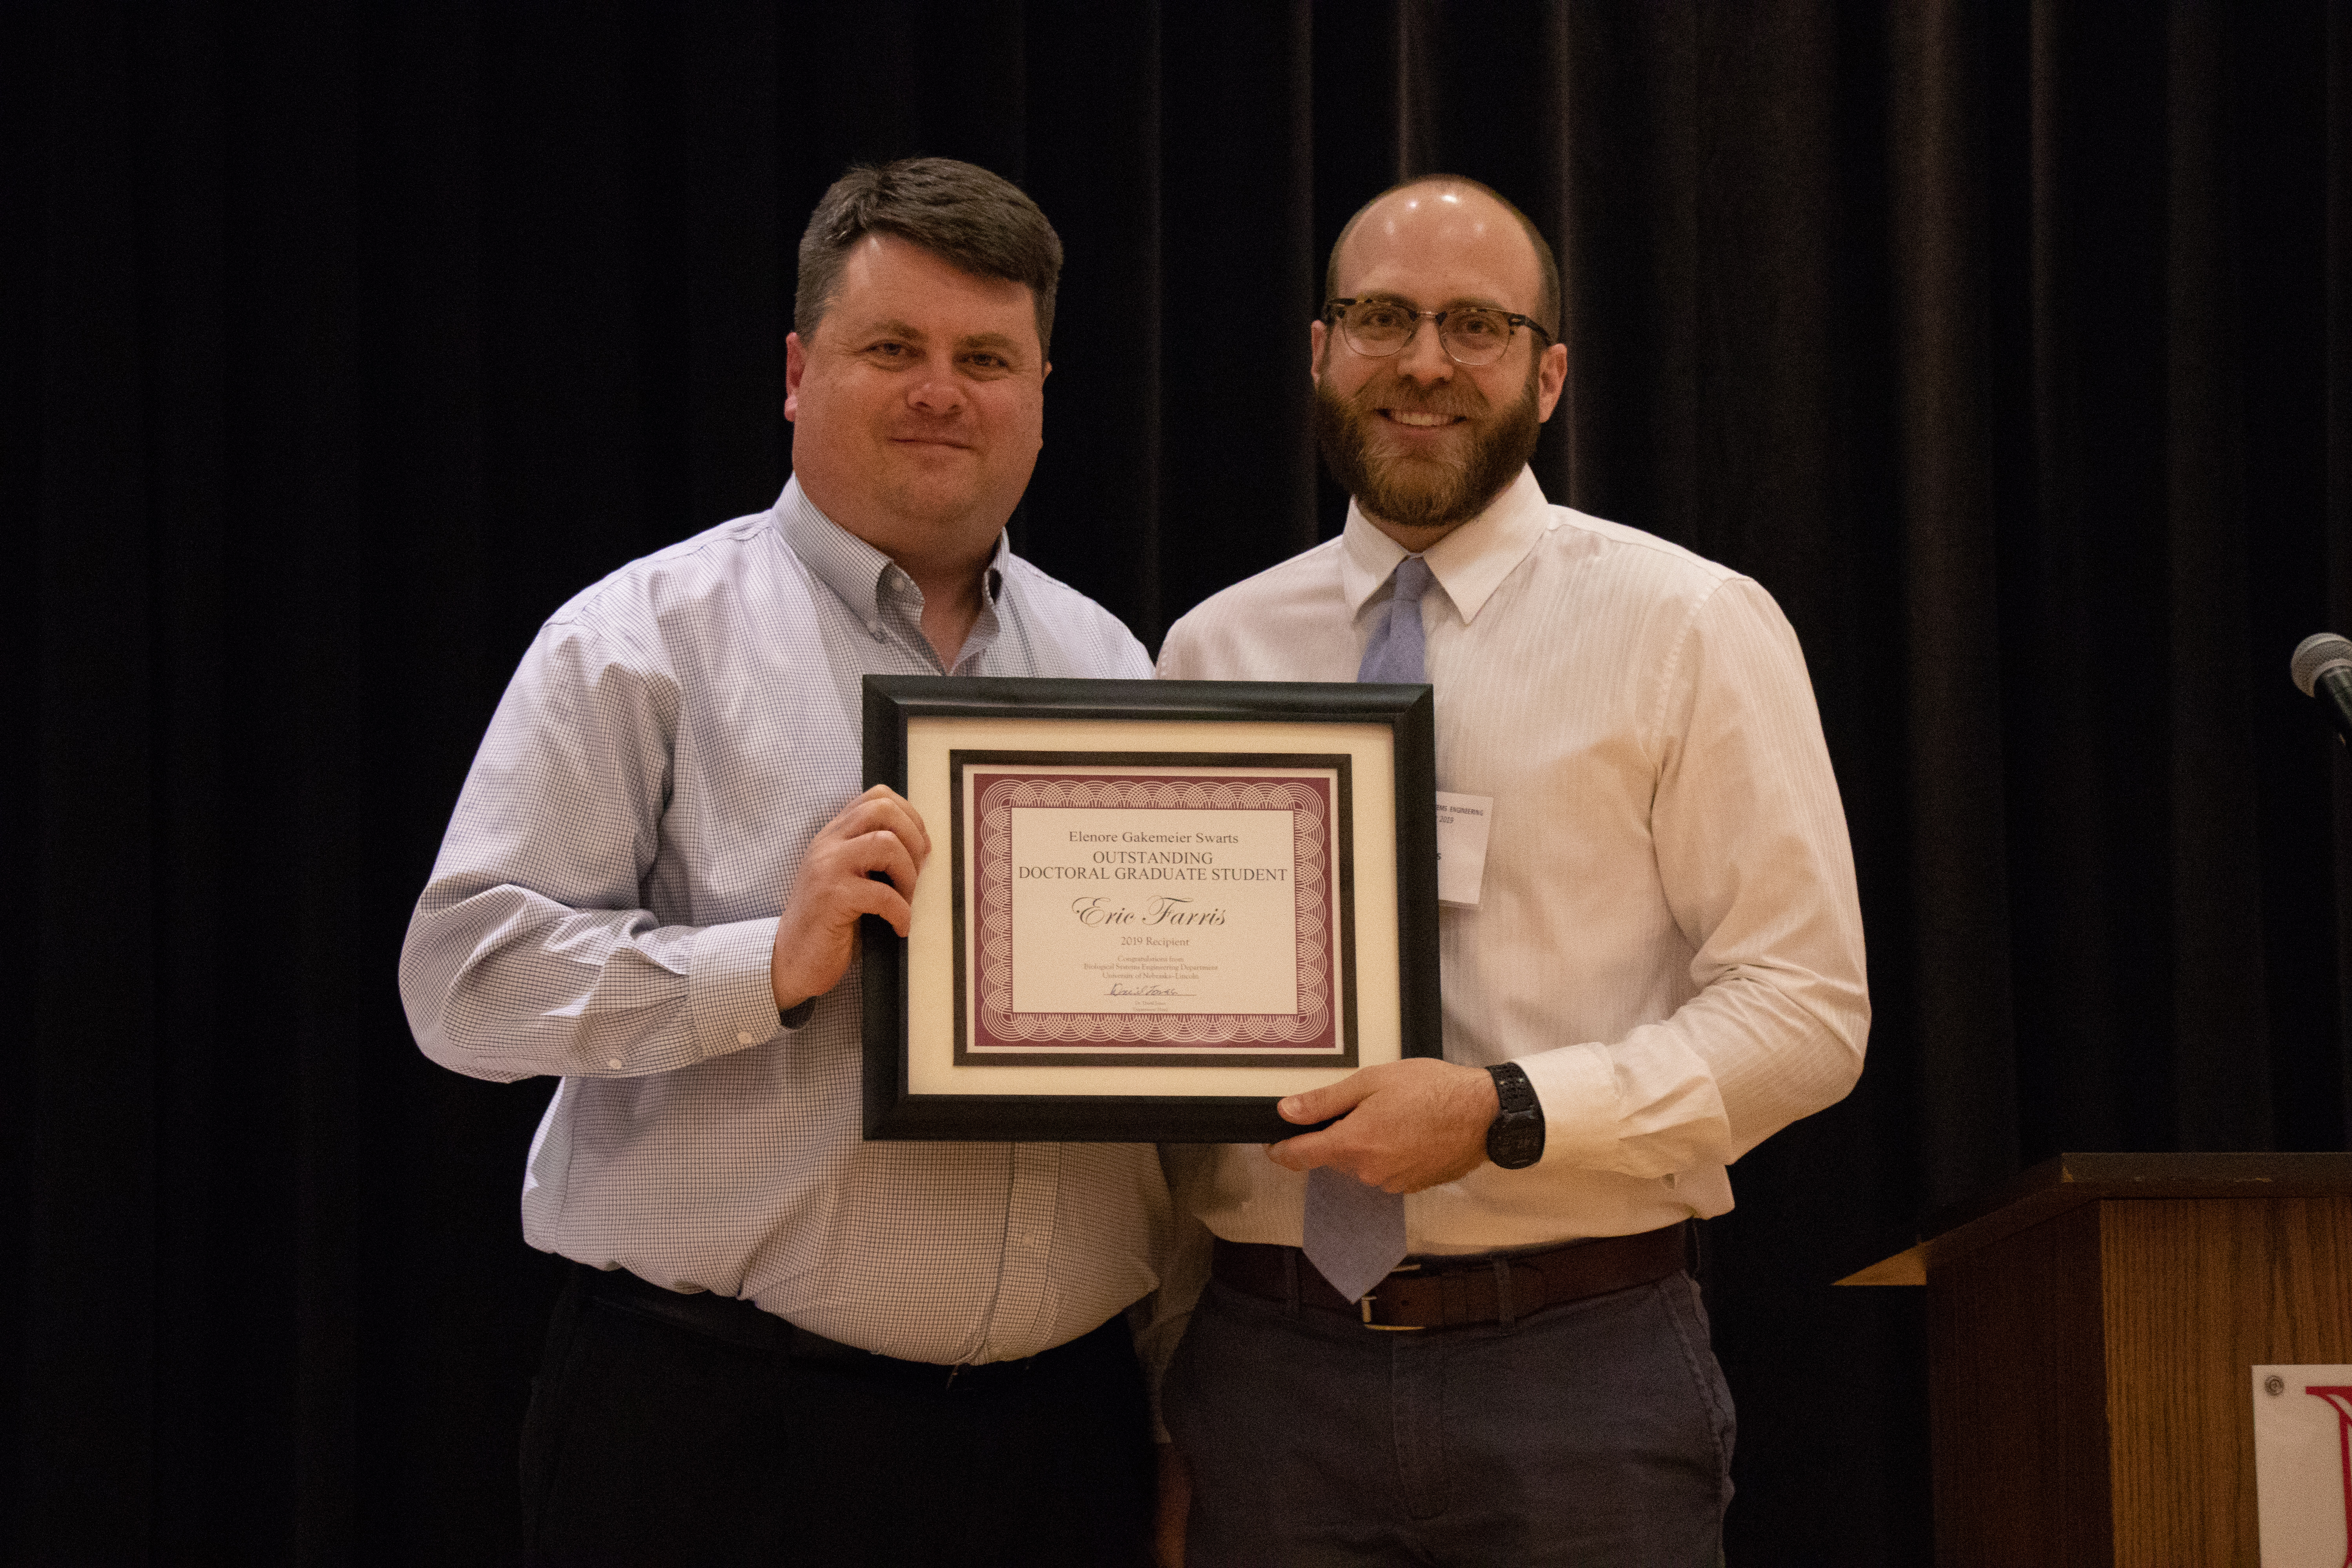 Mark Wilkins (left) presents the Elenore Gakemeier Swarts Outstanding Doctoral Graduate Student Award to Eric Farris (right)